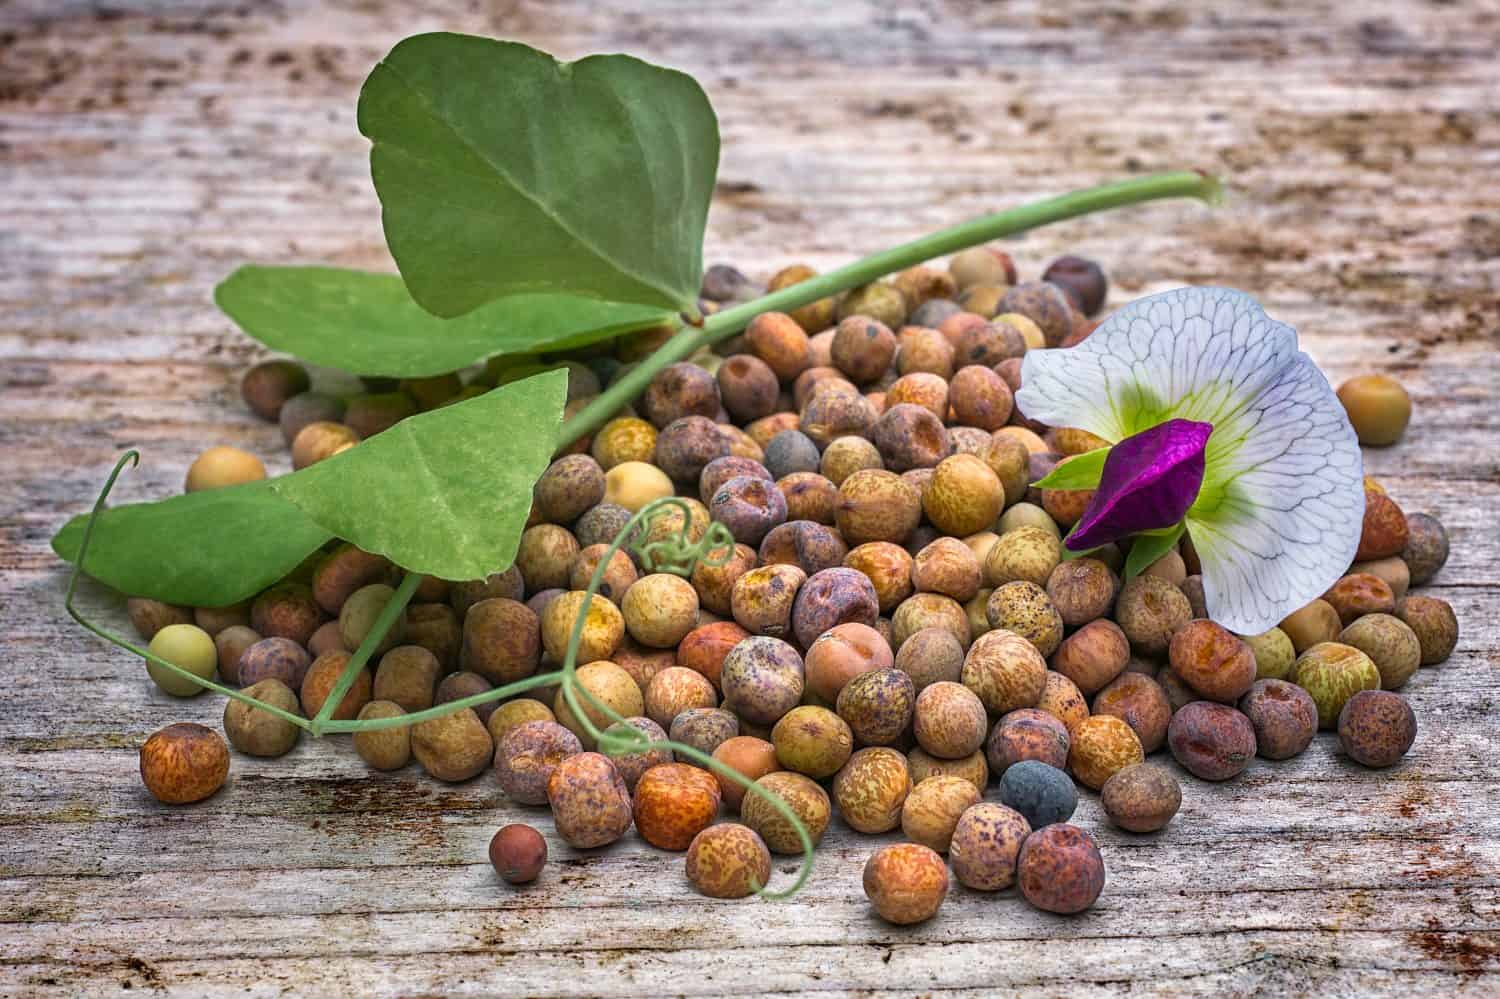 Roveja beans (Pisum sativum var. arvense), also known as robiglio or austrian winter pea, is a Mediterranean pea dried grown in Italy and the Netherlands.